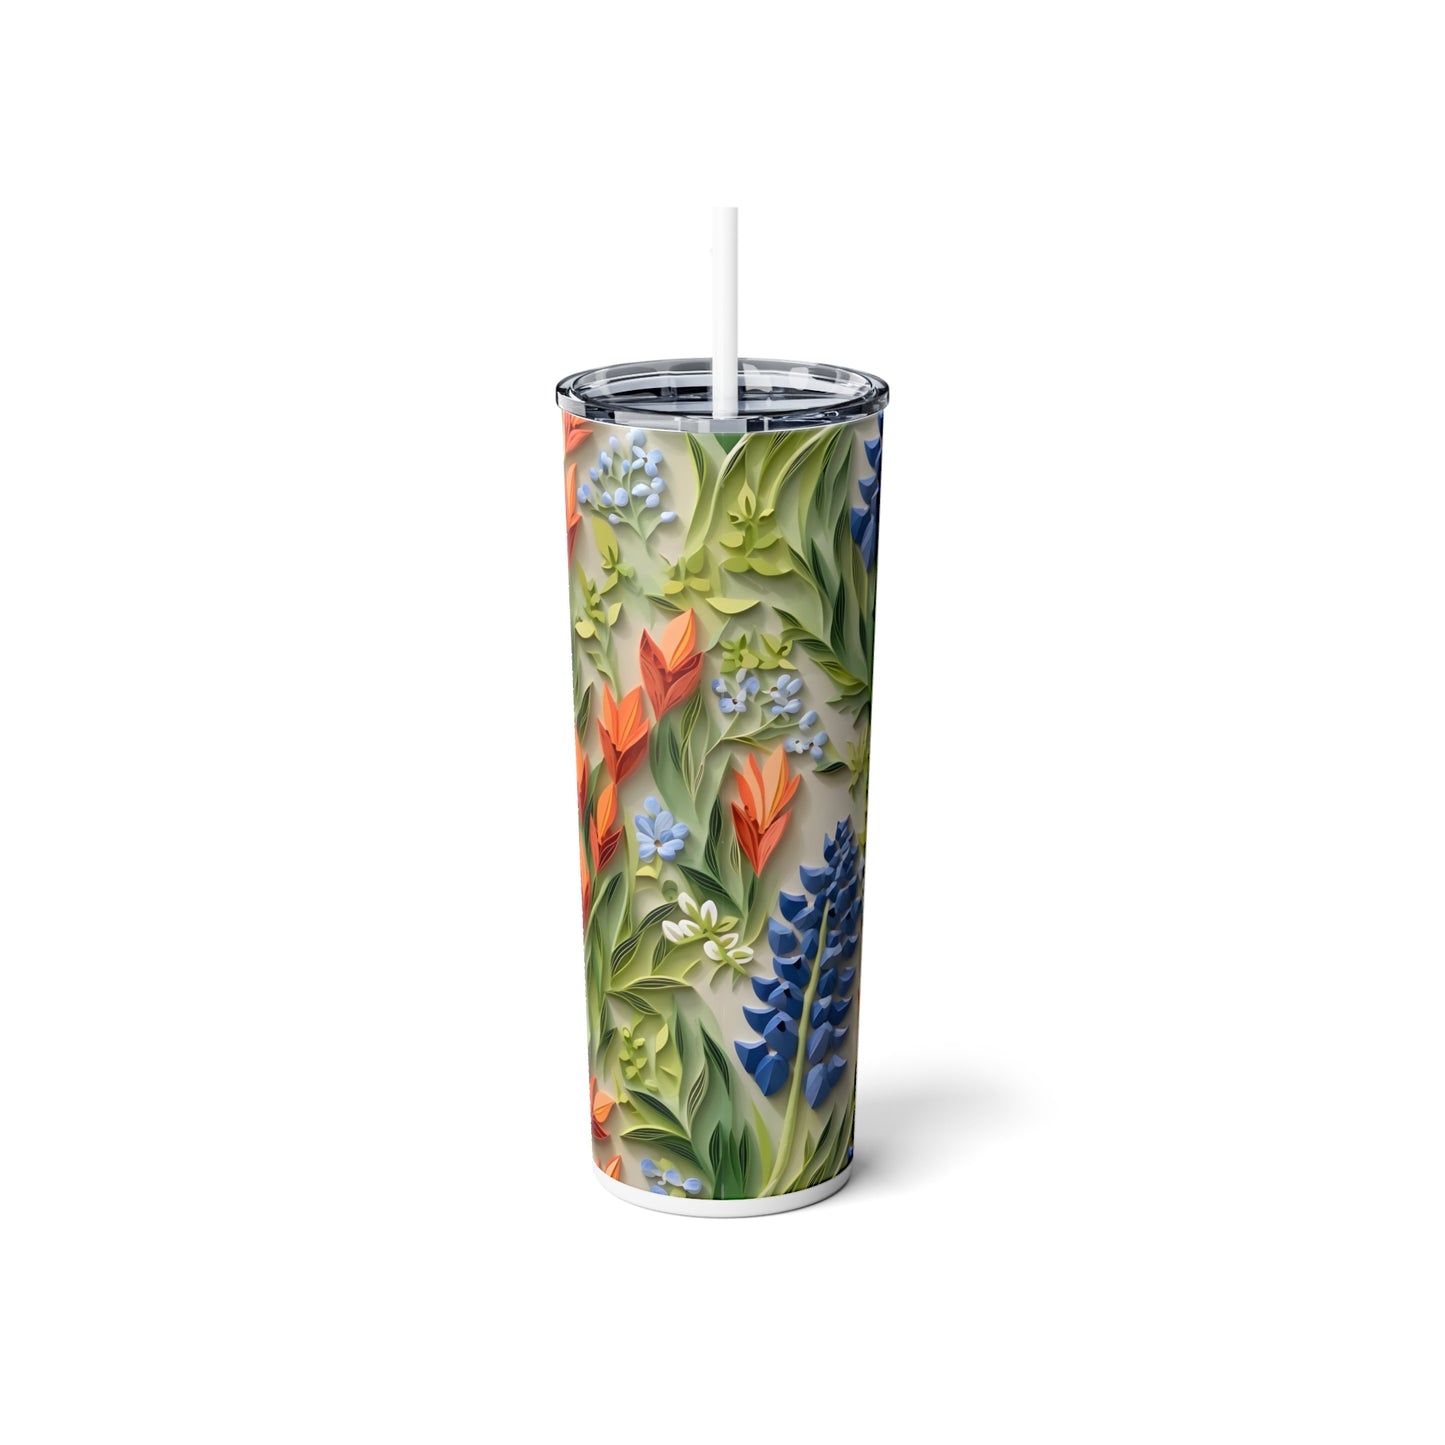 "Texan Beauty: A Field of 3D Embroidered Bluebonnets" - Skinny Tumbler